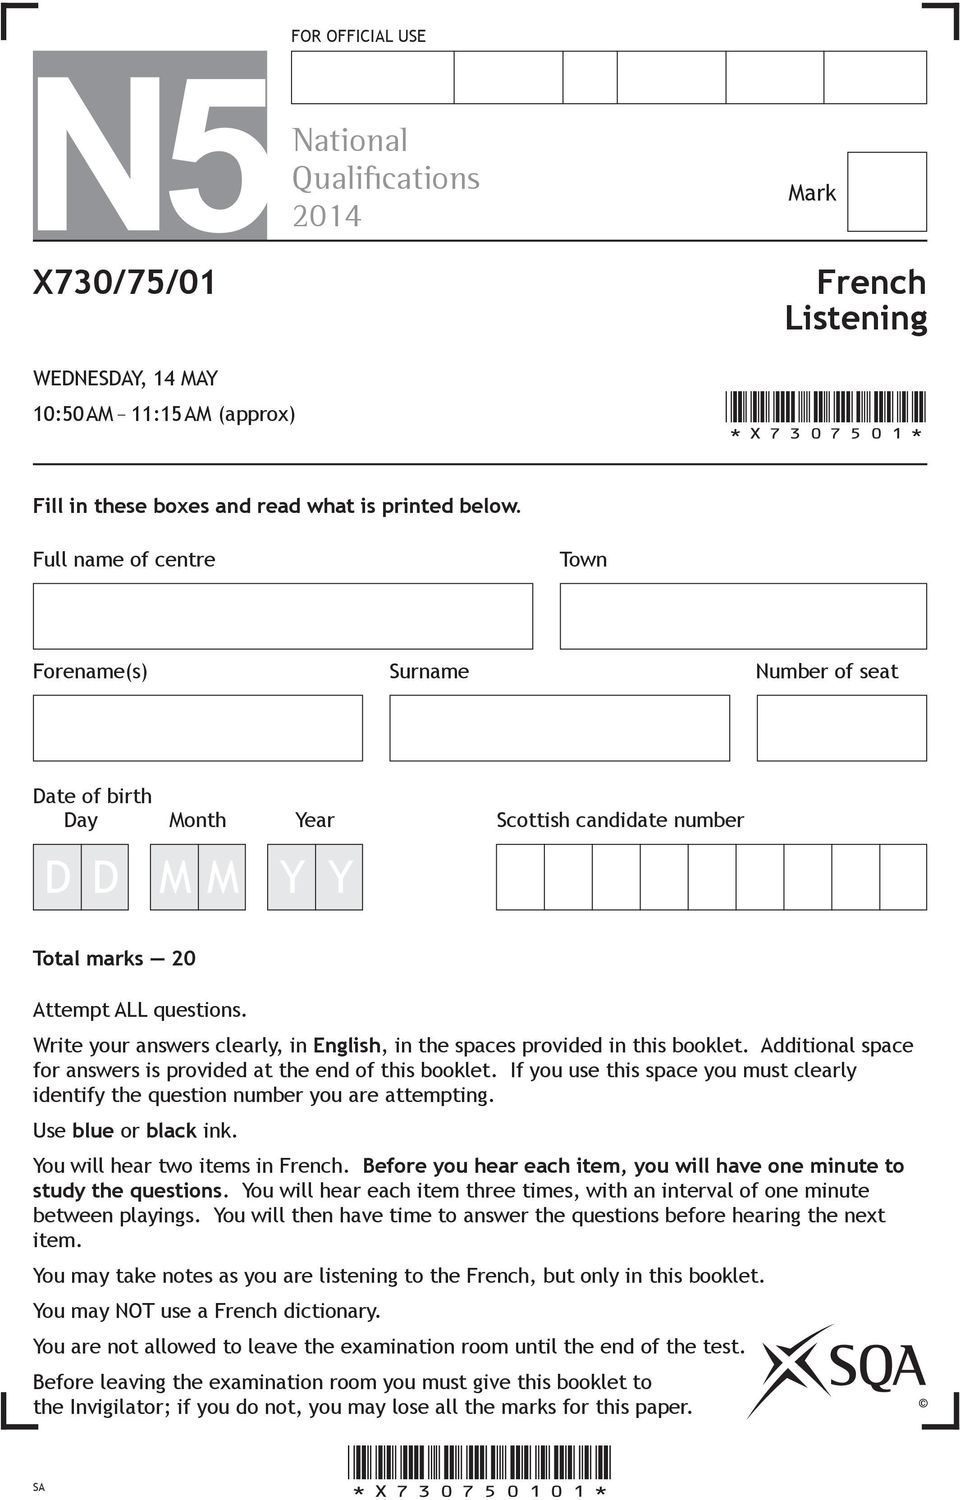 Write your answers clearly, in English, in the spaces provided in this booklet. Additional space for answers is provided at the end of this booklet.